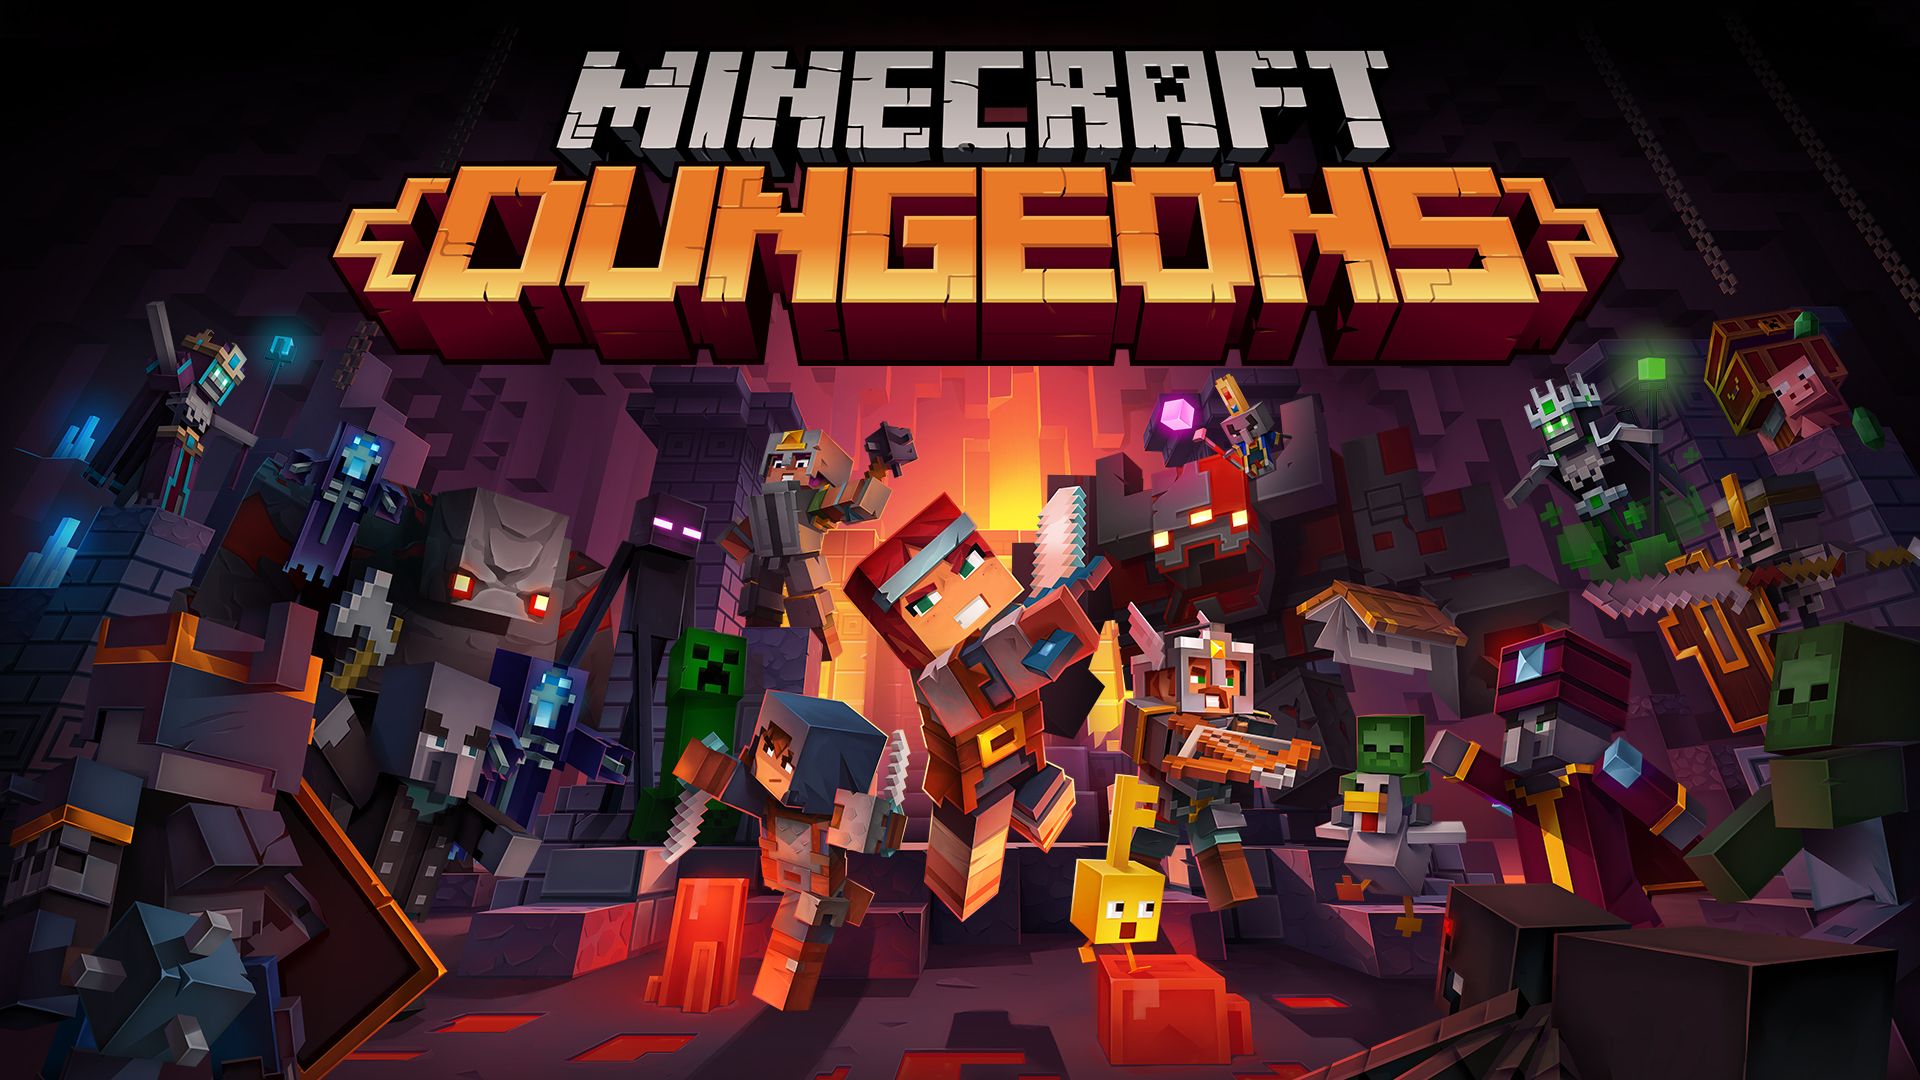 Featured image of post Minecraft Dungeons Wallpaper Darkest dungeon digital wallpaper darkest dungeon video games darkest dungeon the crimson court dungeons dragons rise of the underdark wallpaper dungeons and dragons d d